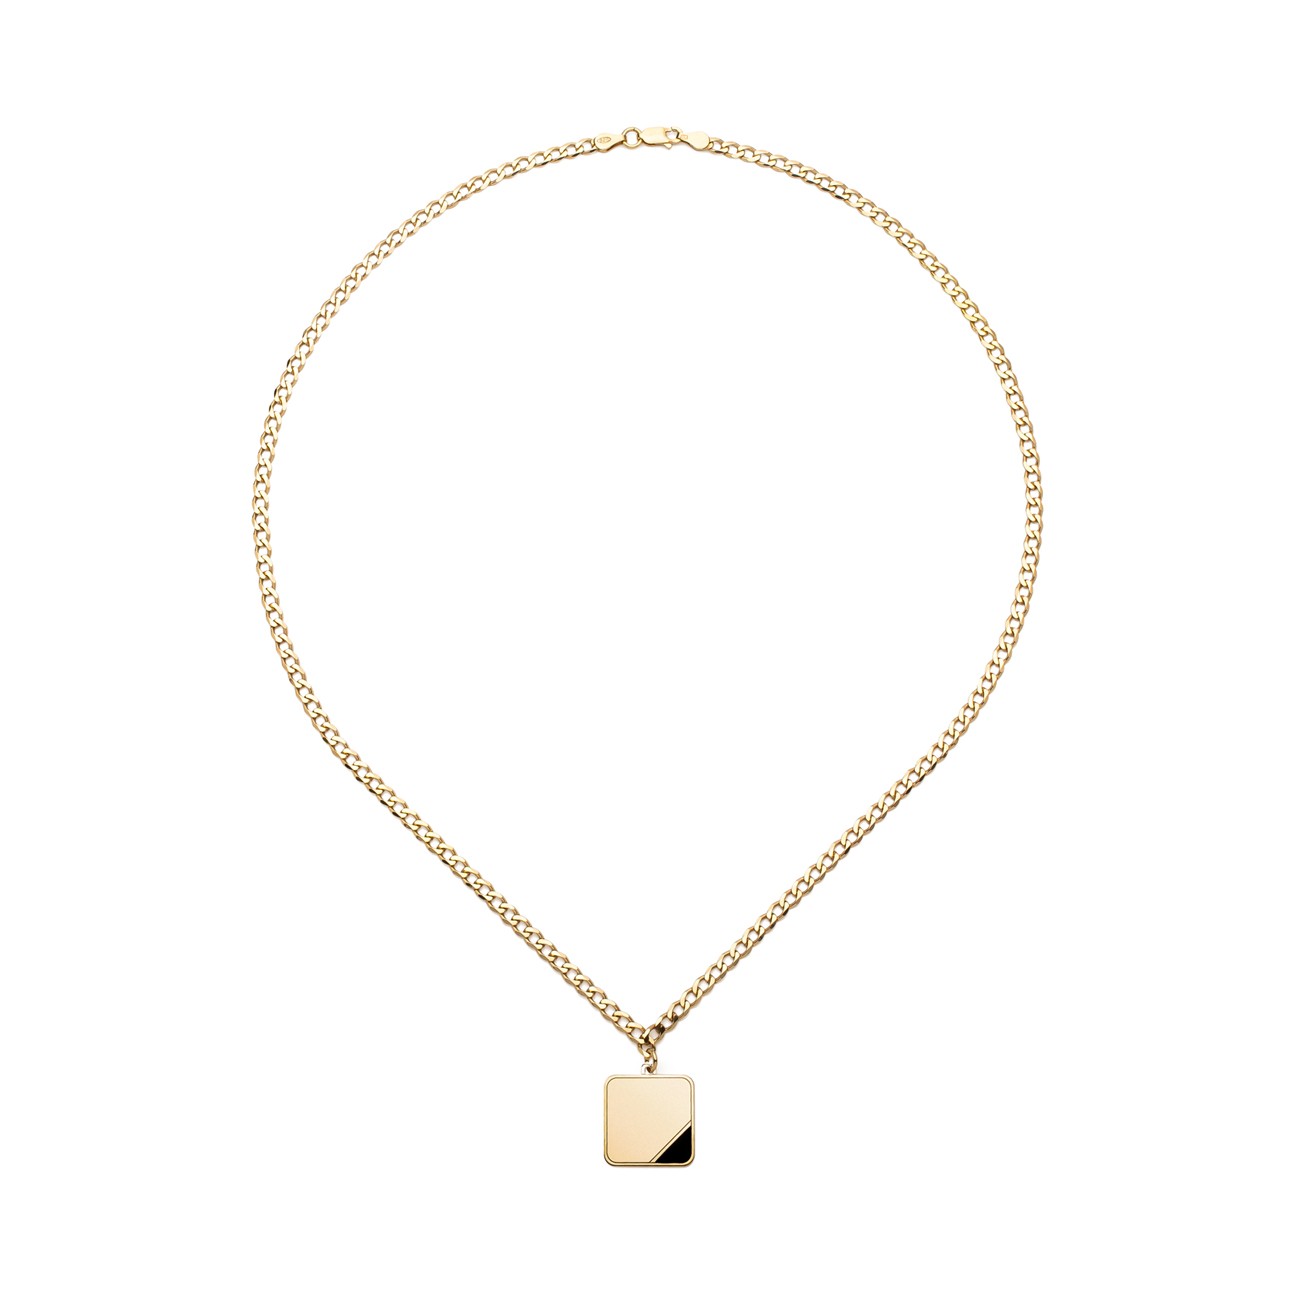 Giorre Man's Necklace 37952